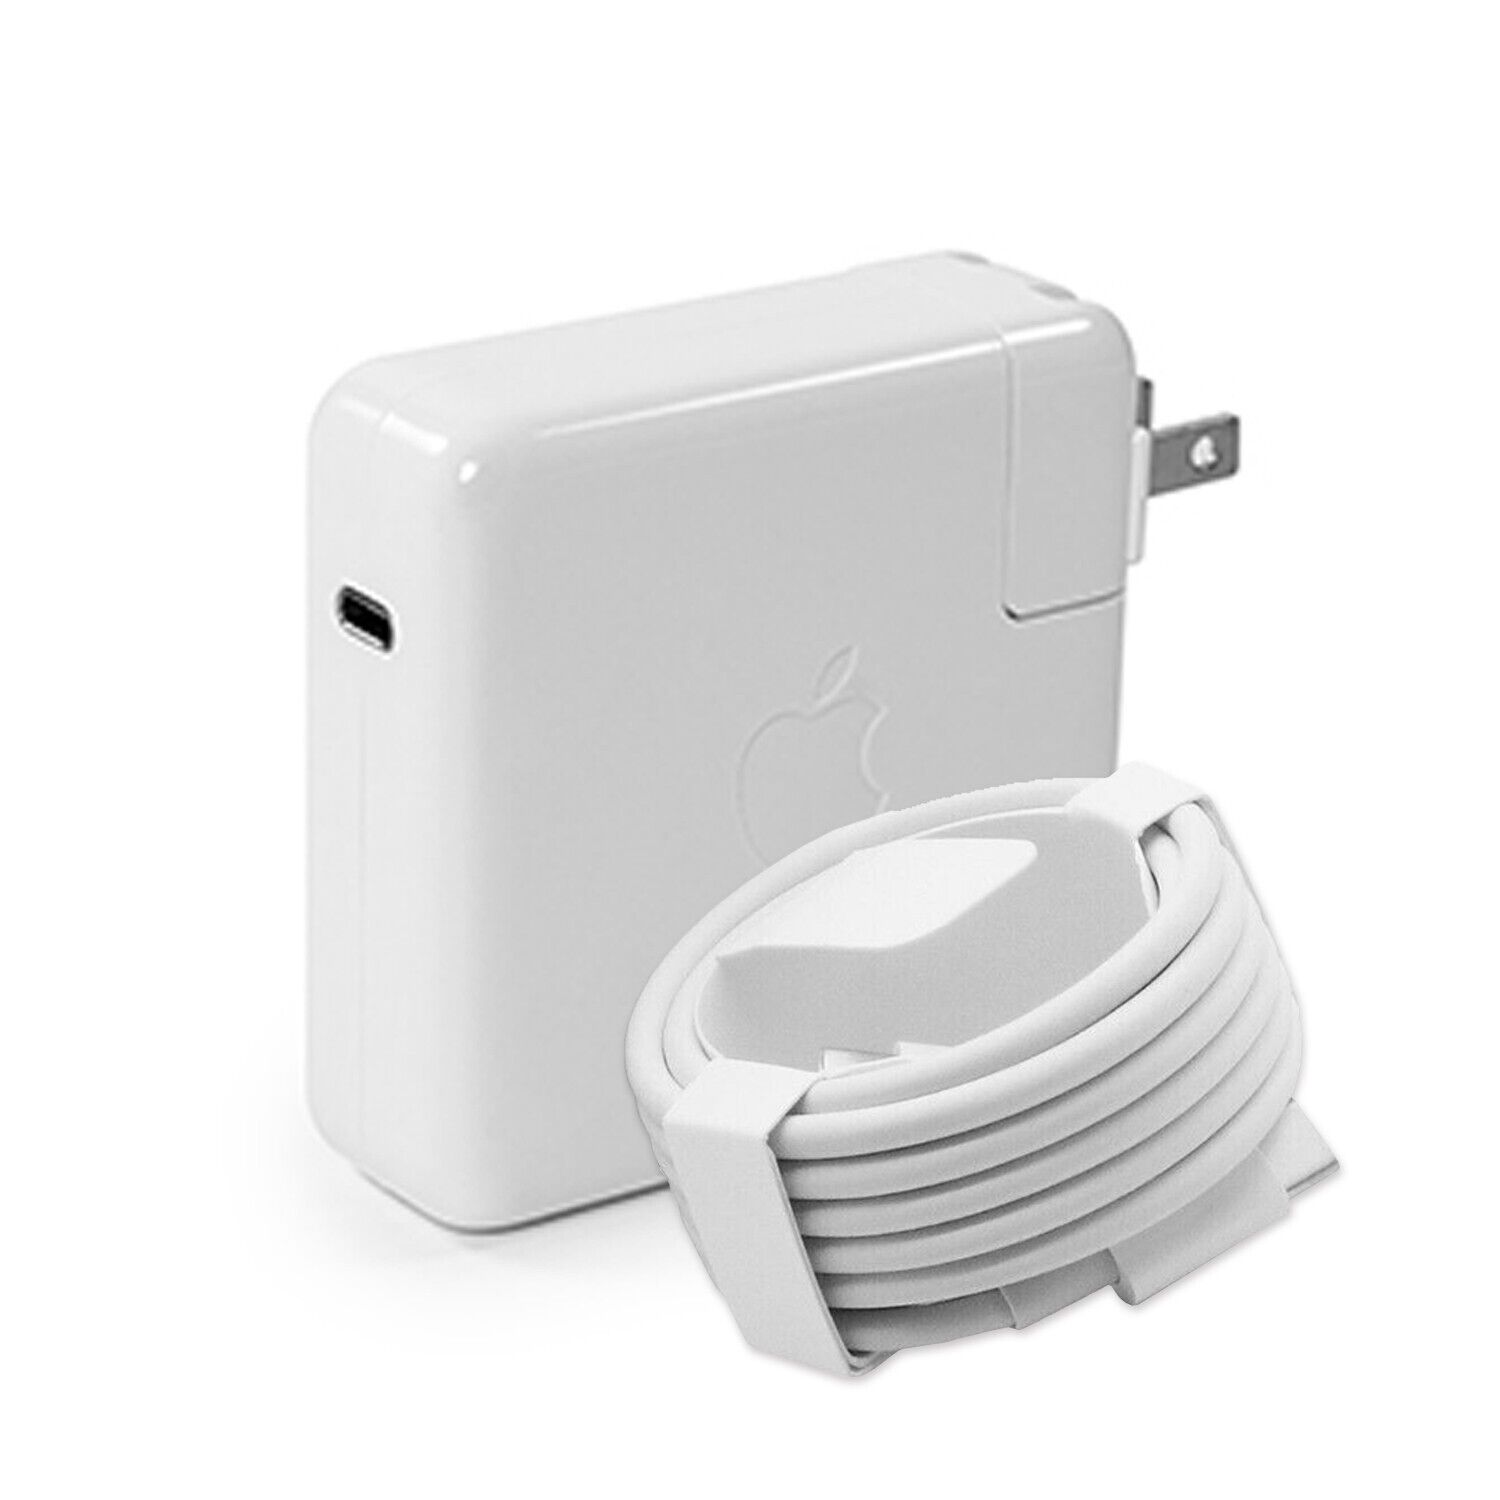 Genuine Apple 96W USB-C Power Adapter for Apple Mac A2166 W/ 2 Meter Cable